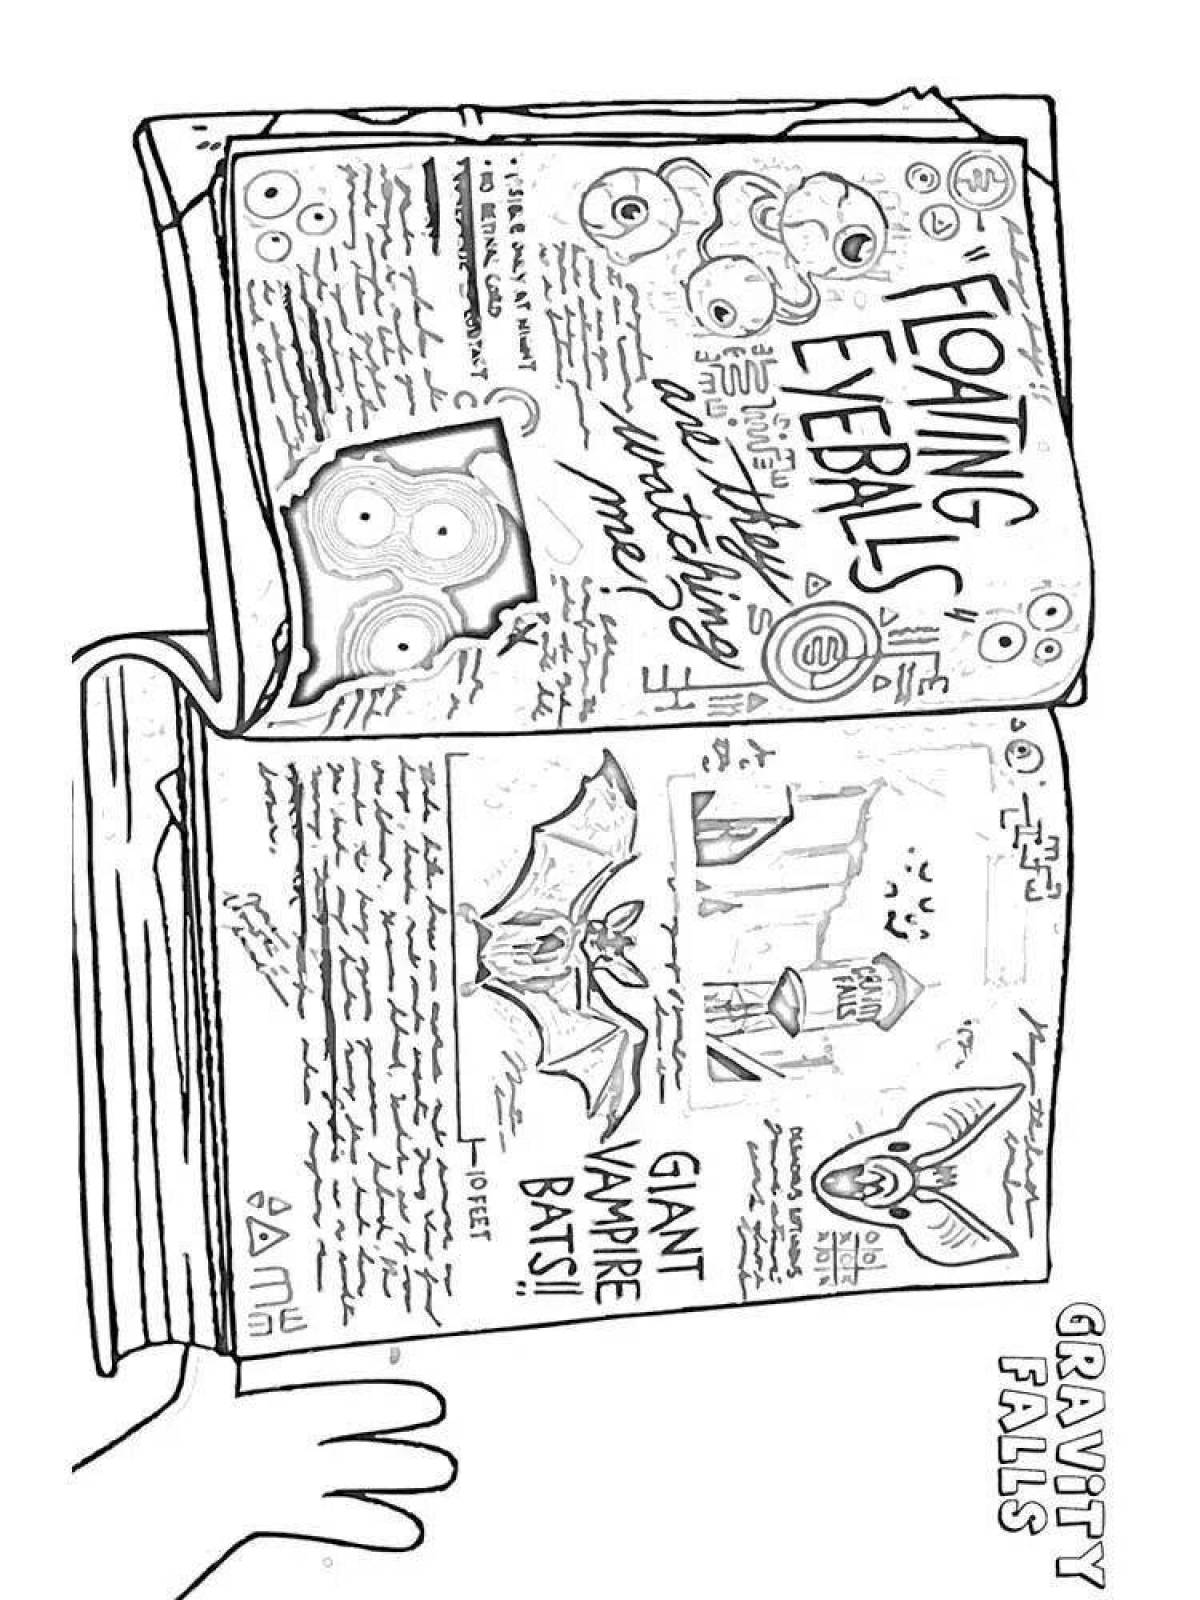 Colorful Gravity Falls Diary Coloring Page